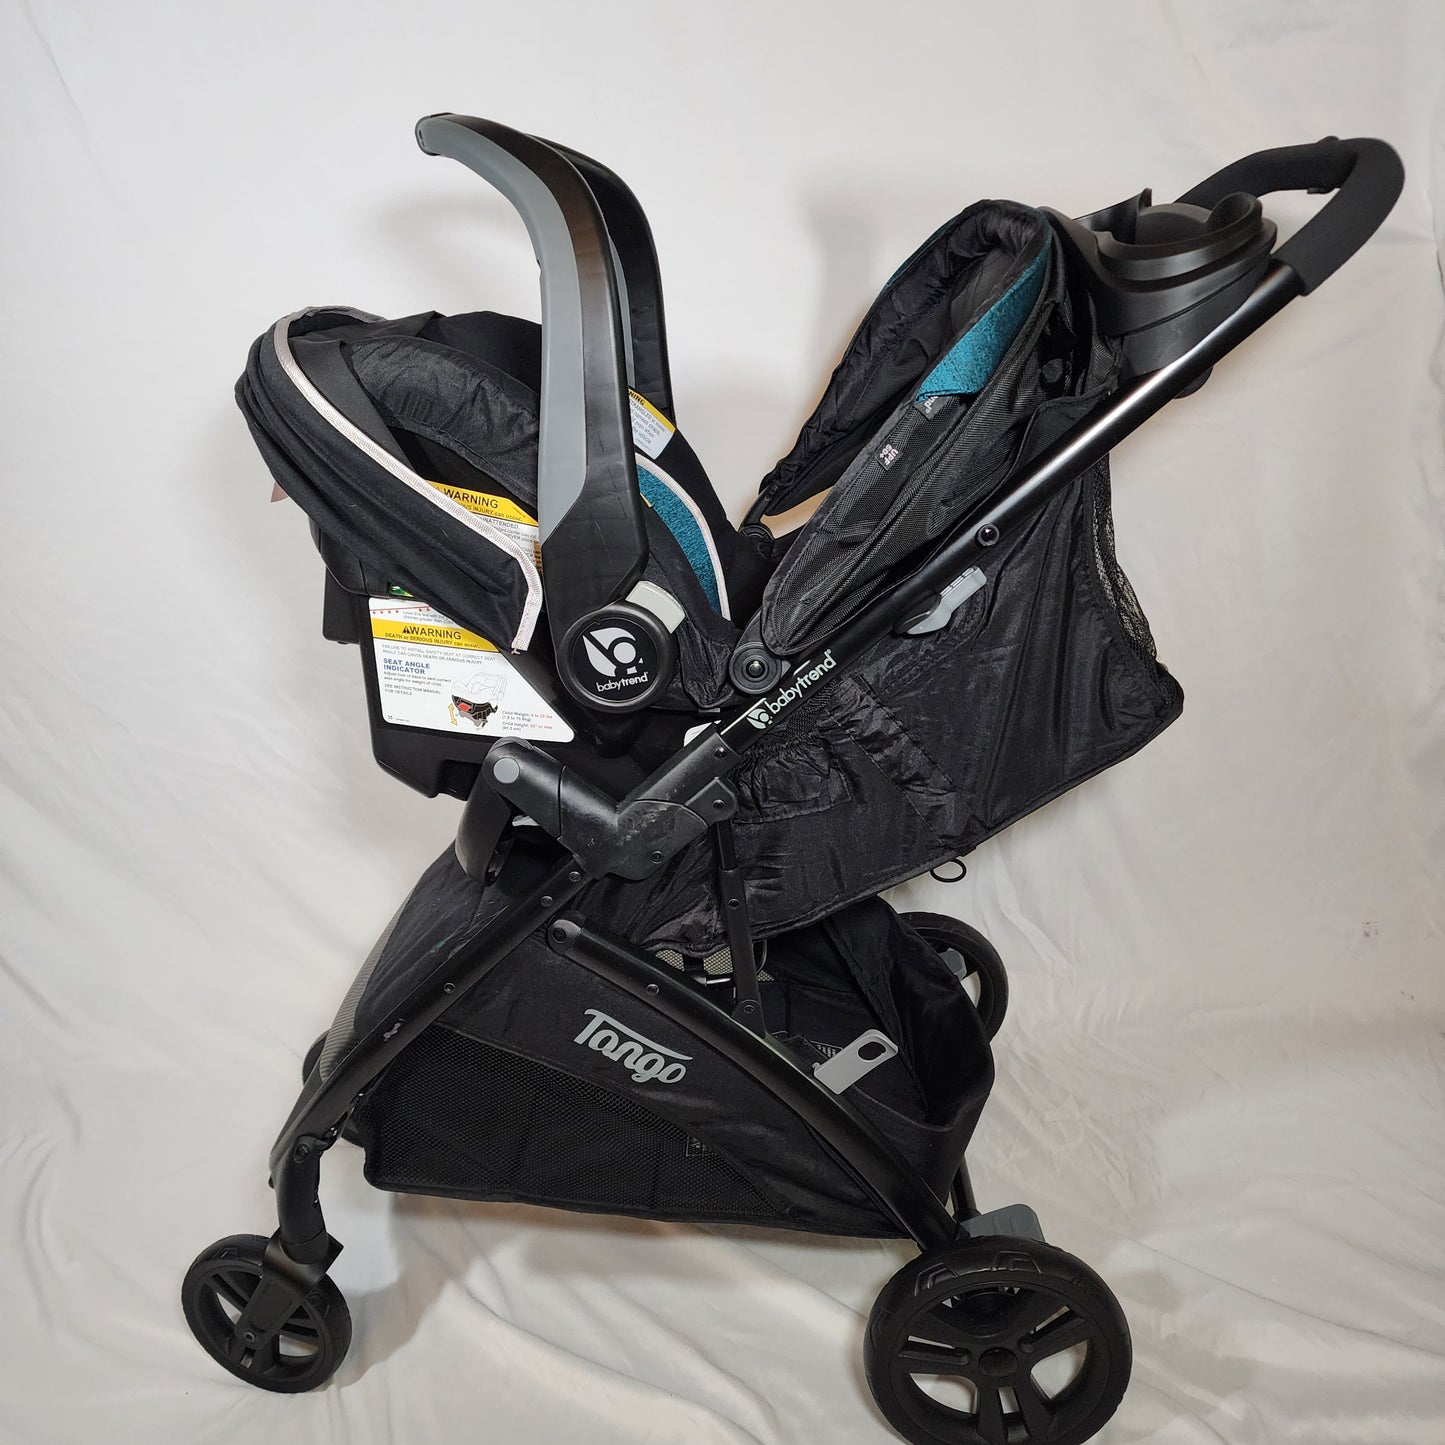 Baby Trend Tango Travel System, Veridian